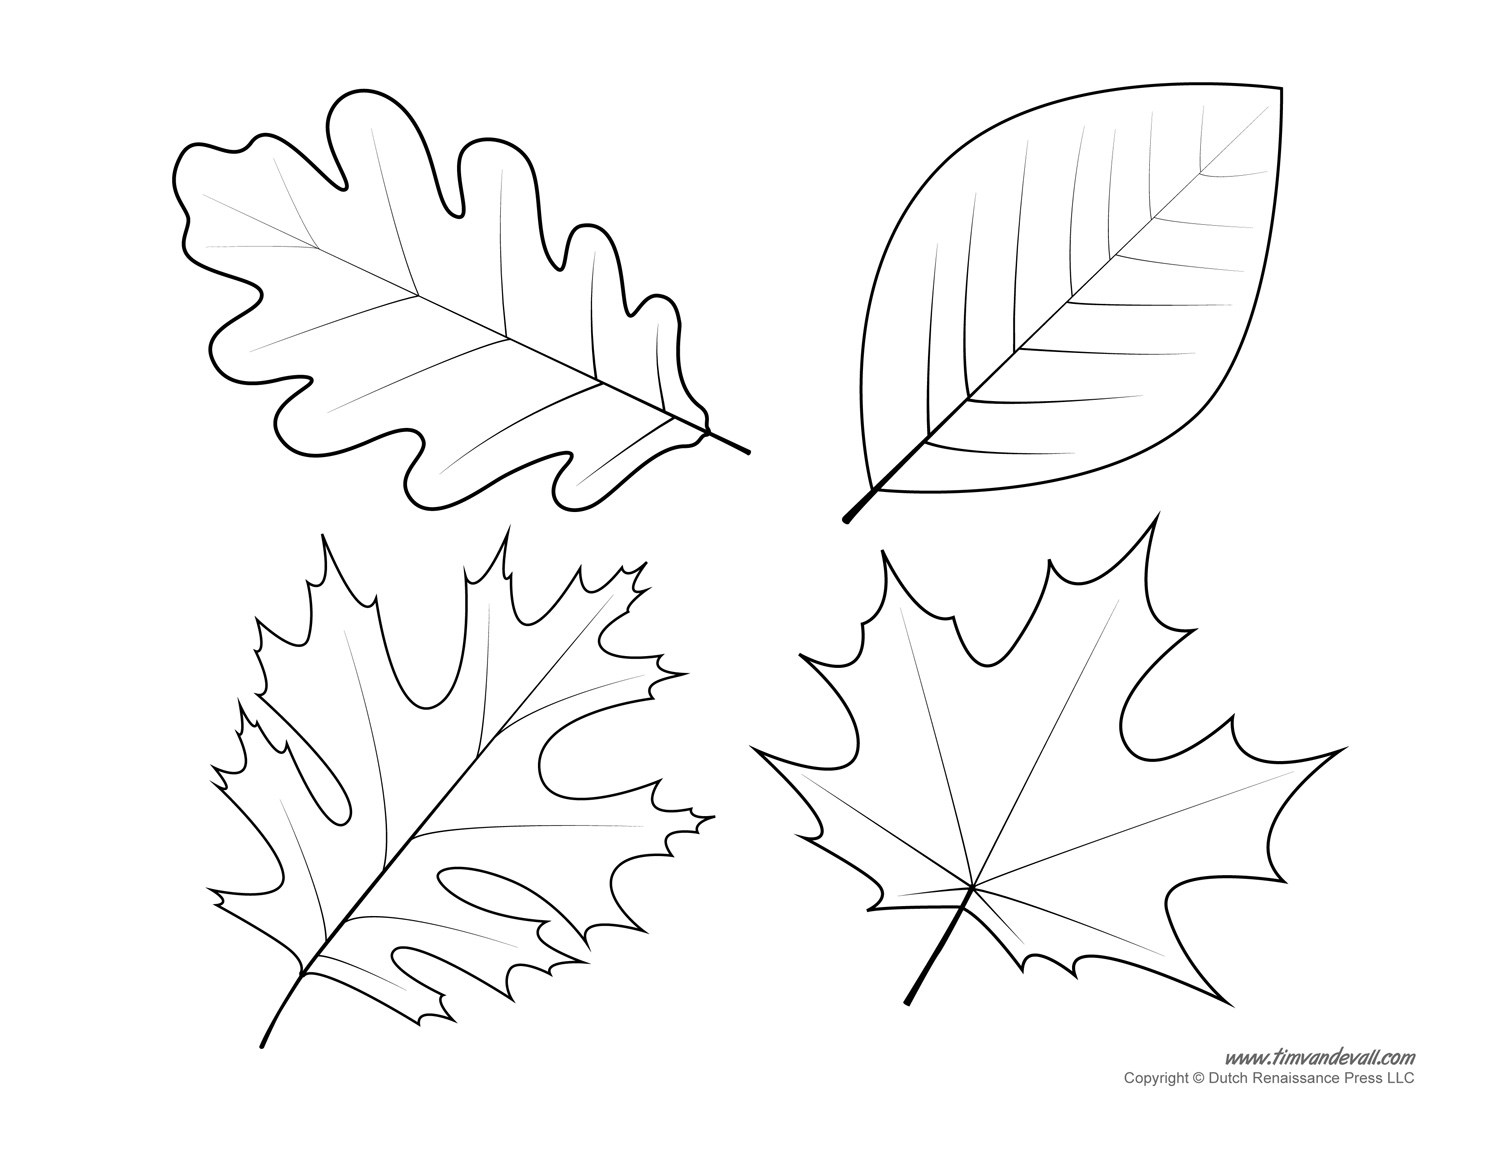 oak-leaf-drawing-template-at-paintingvalley-explore-collection-of